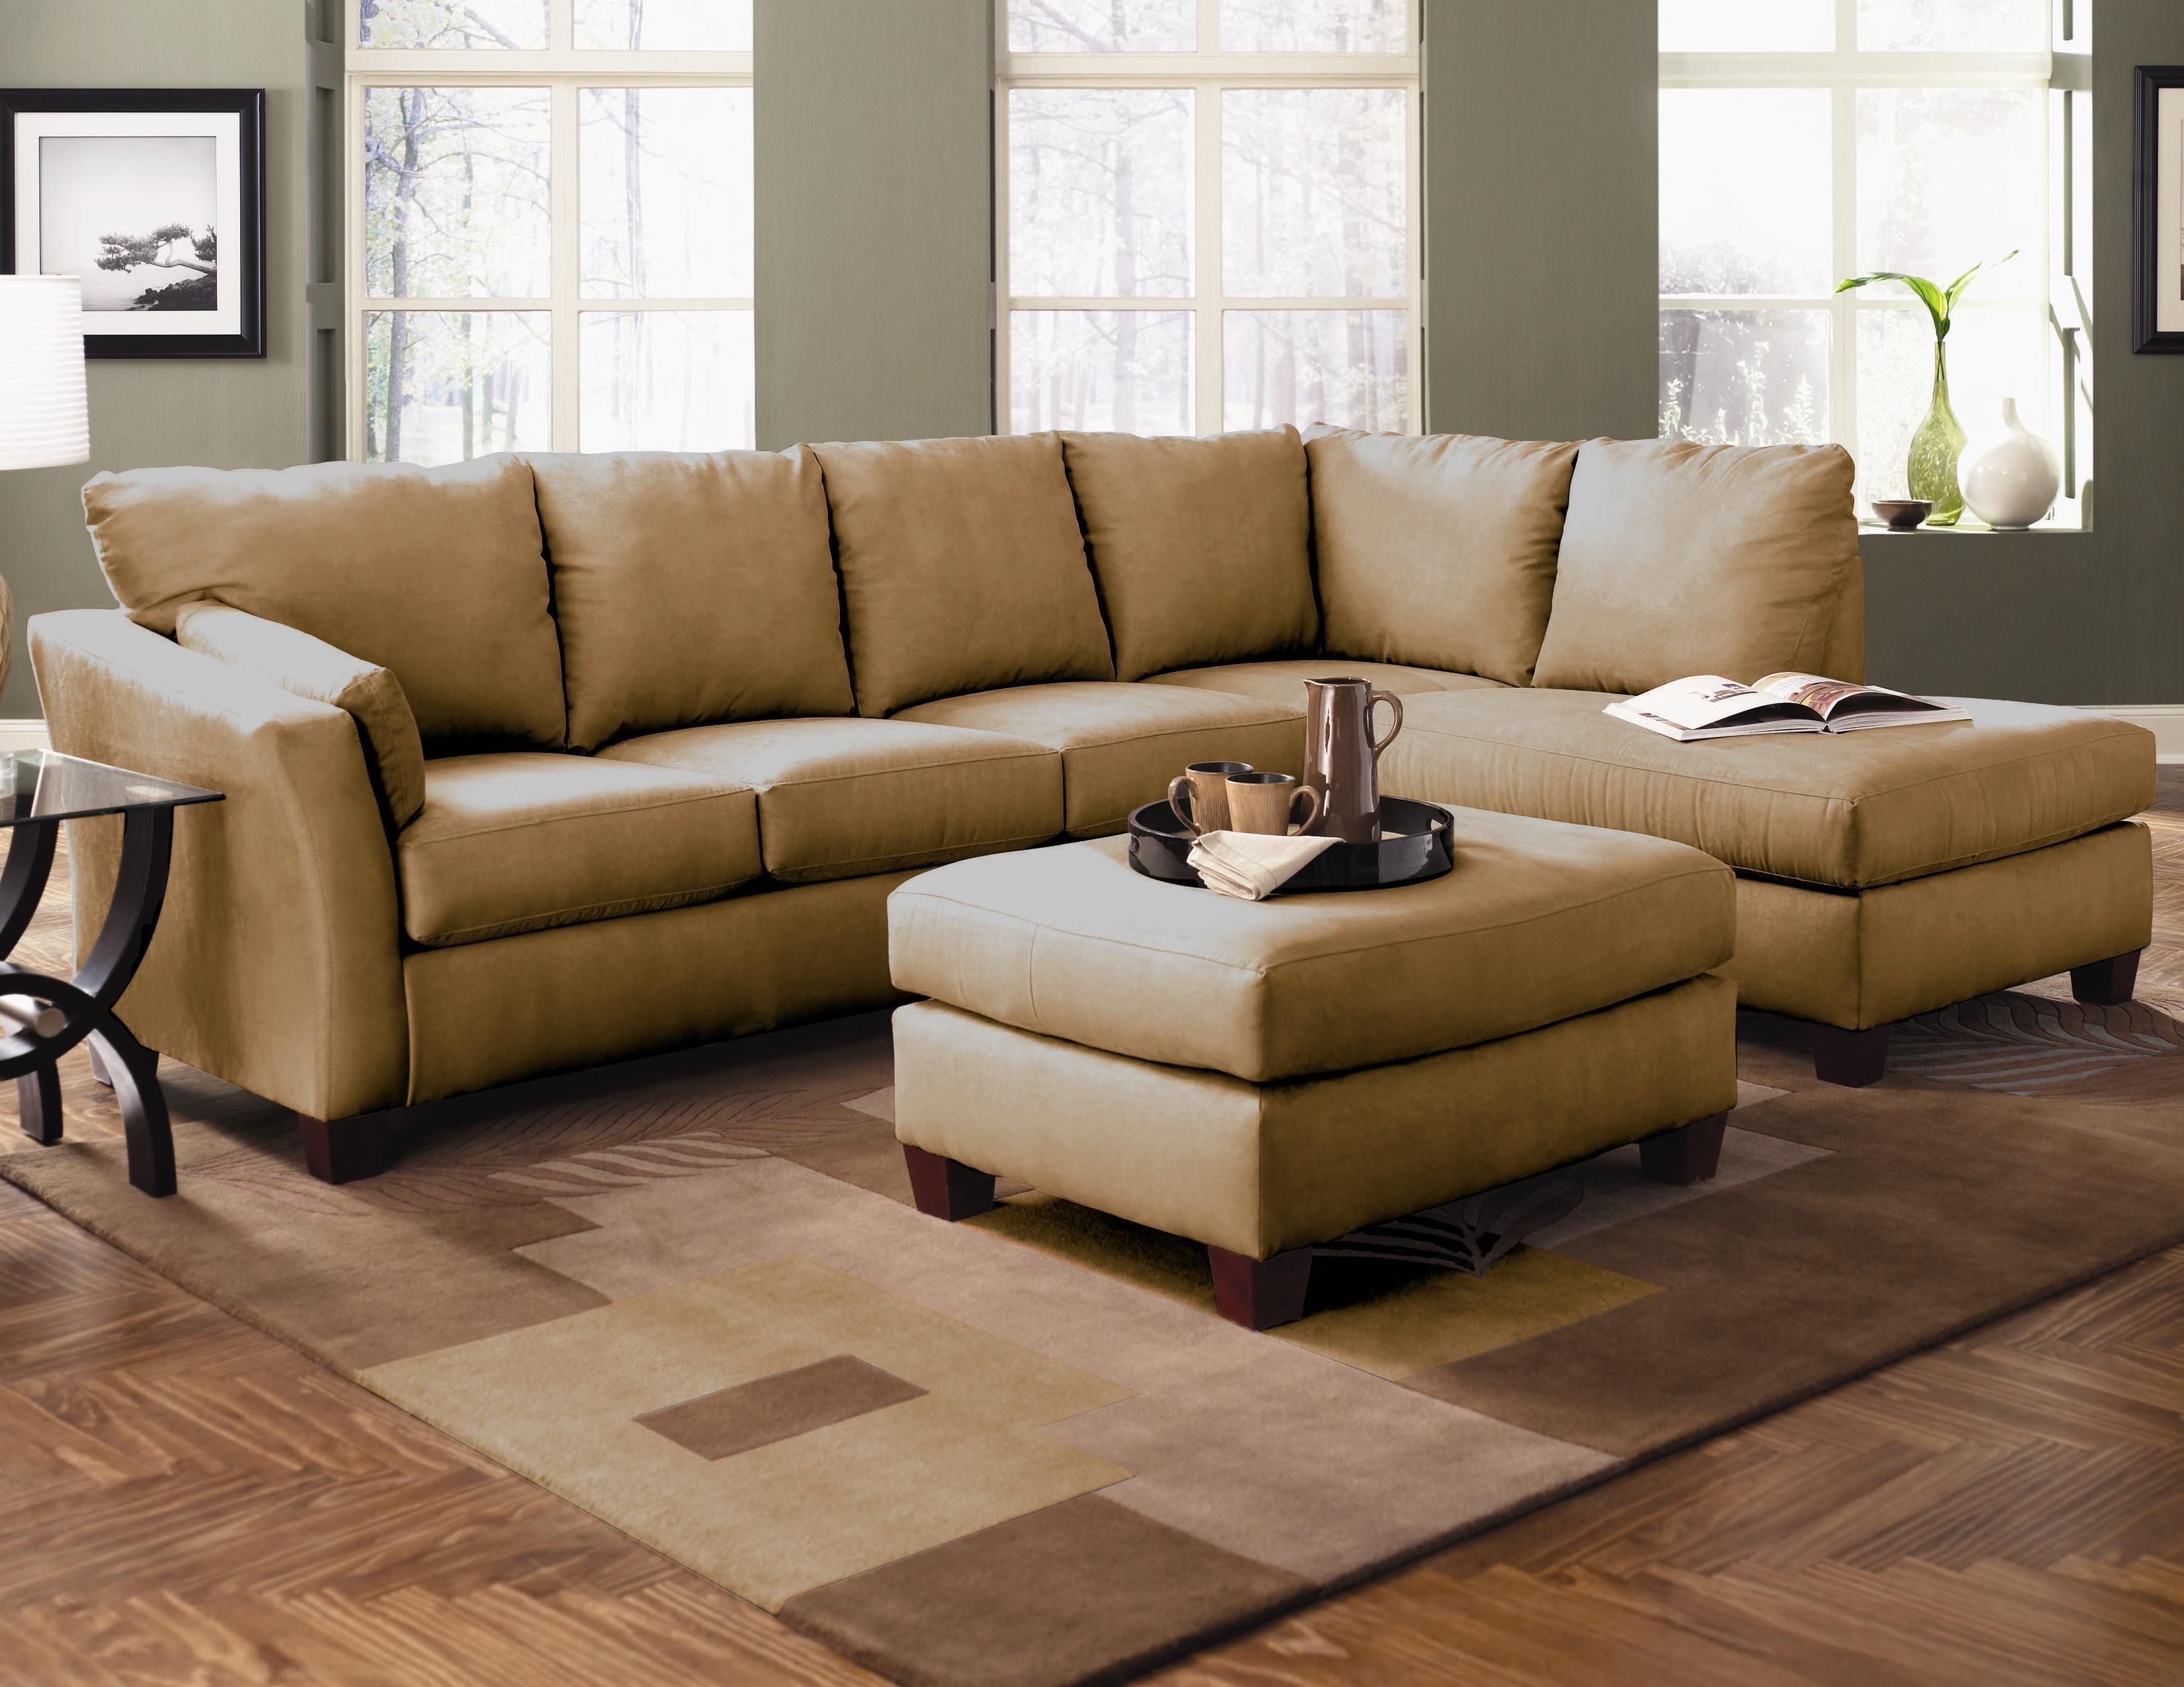 Furniture : Sectional Couch Costco New Magnificent Microfiber Regarding Victoria Bc Sectional Sofas (View 6 of 10)